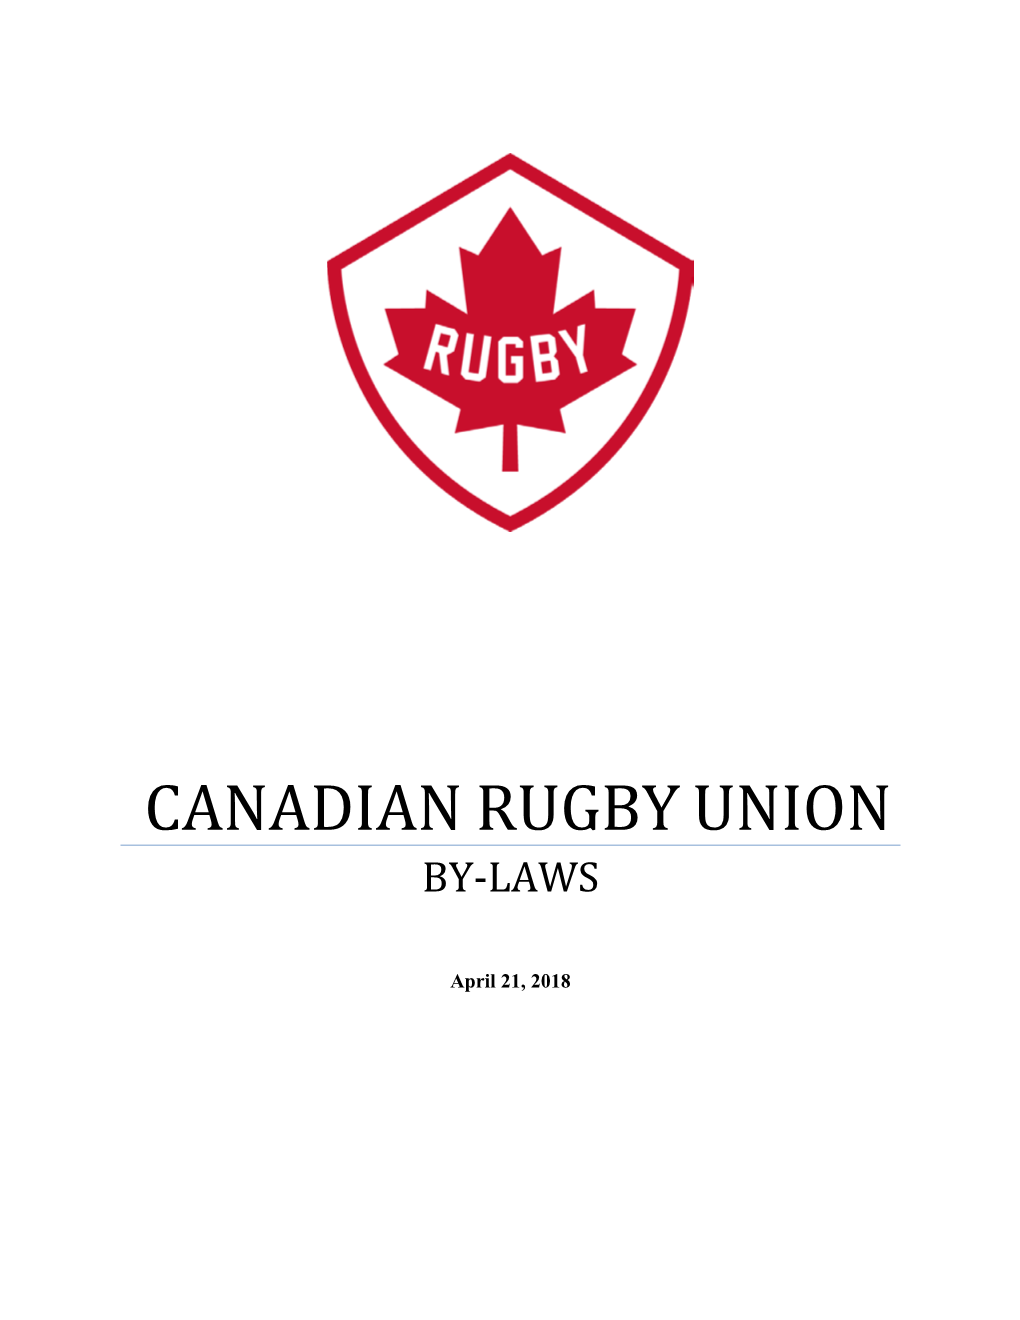 Canadian Rugby Union By-Laws